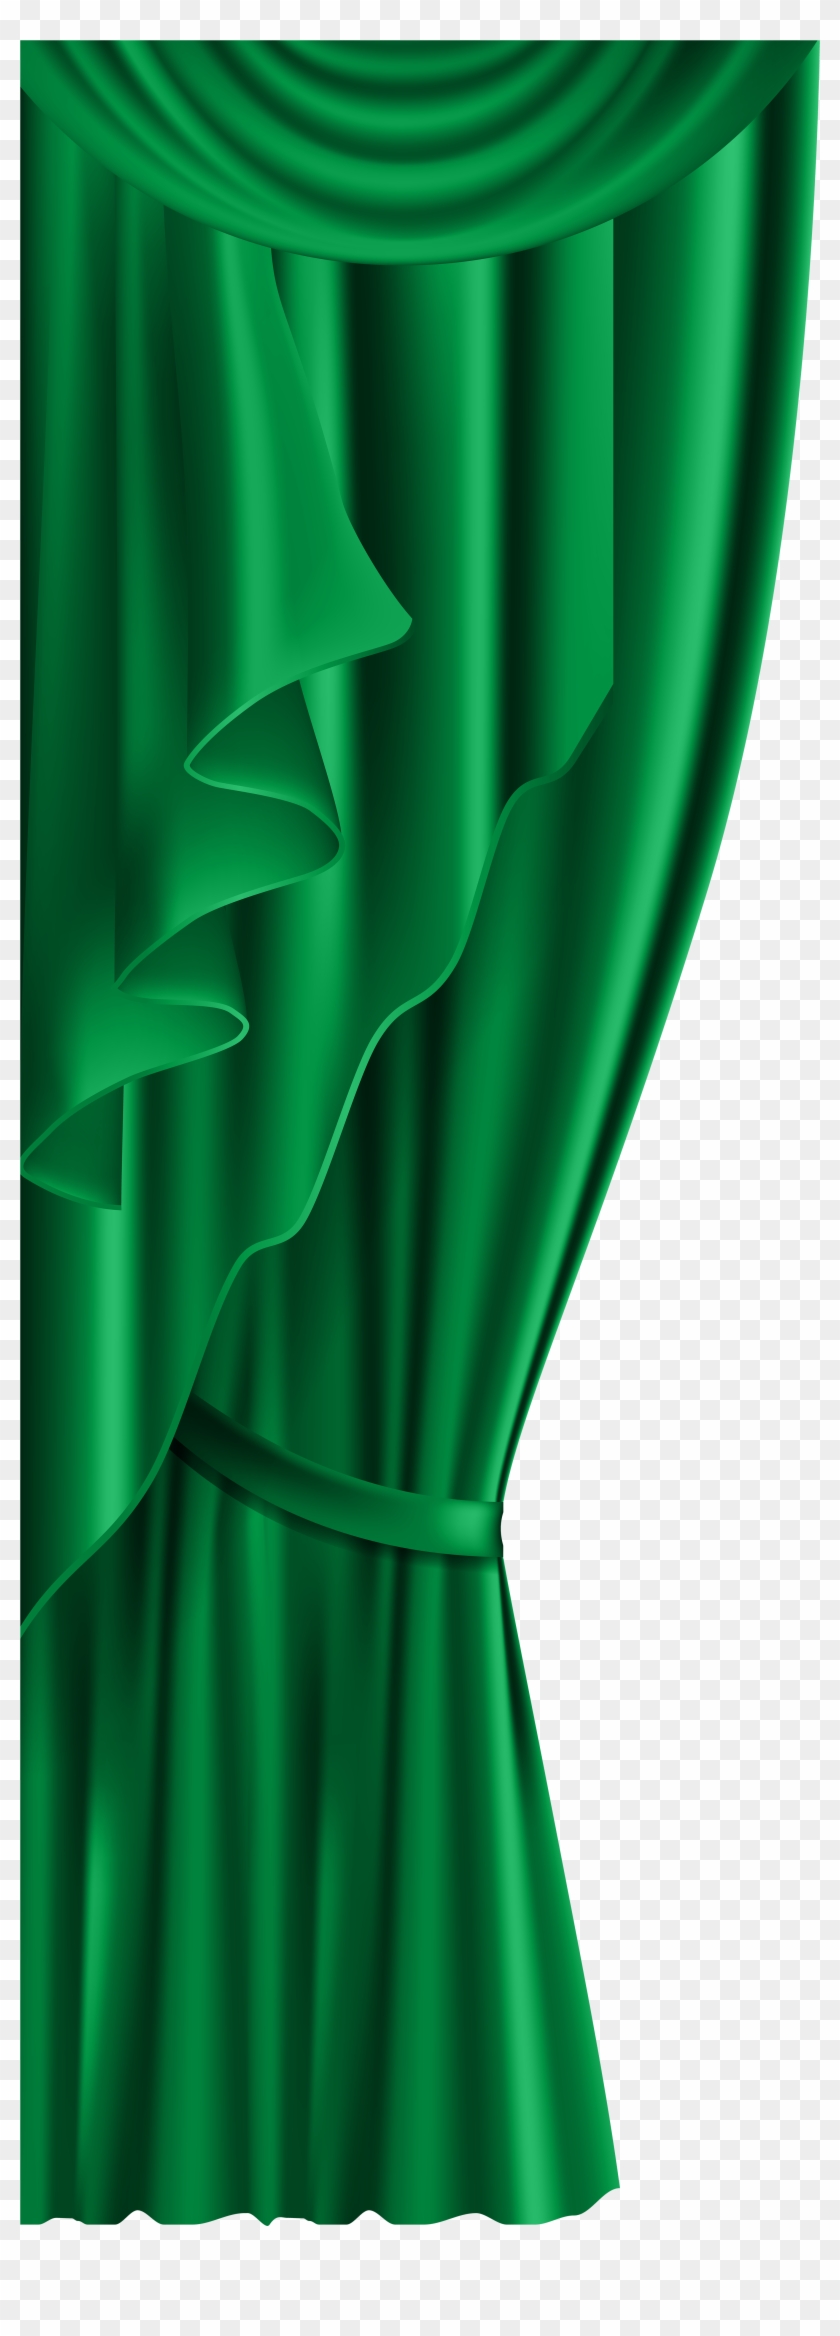 Curtain Green Transparent Png Clip Art Image - Green Curtain Png #191800